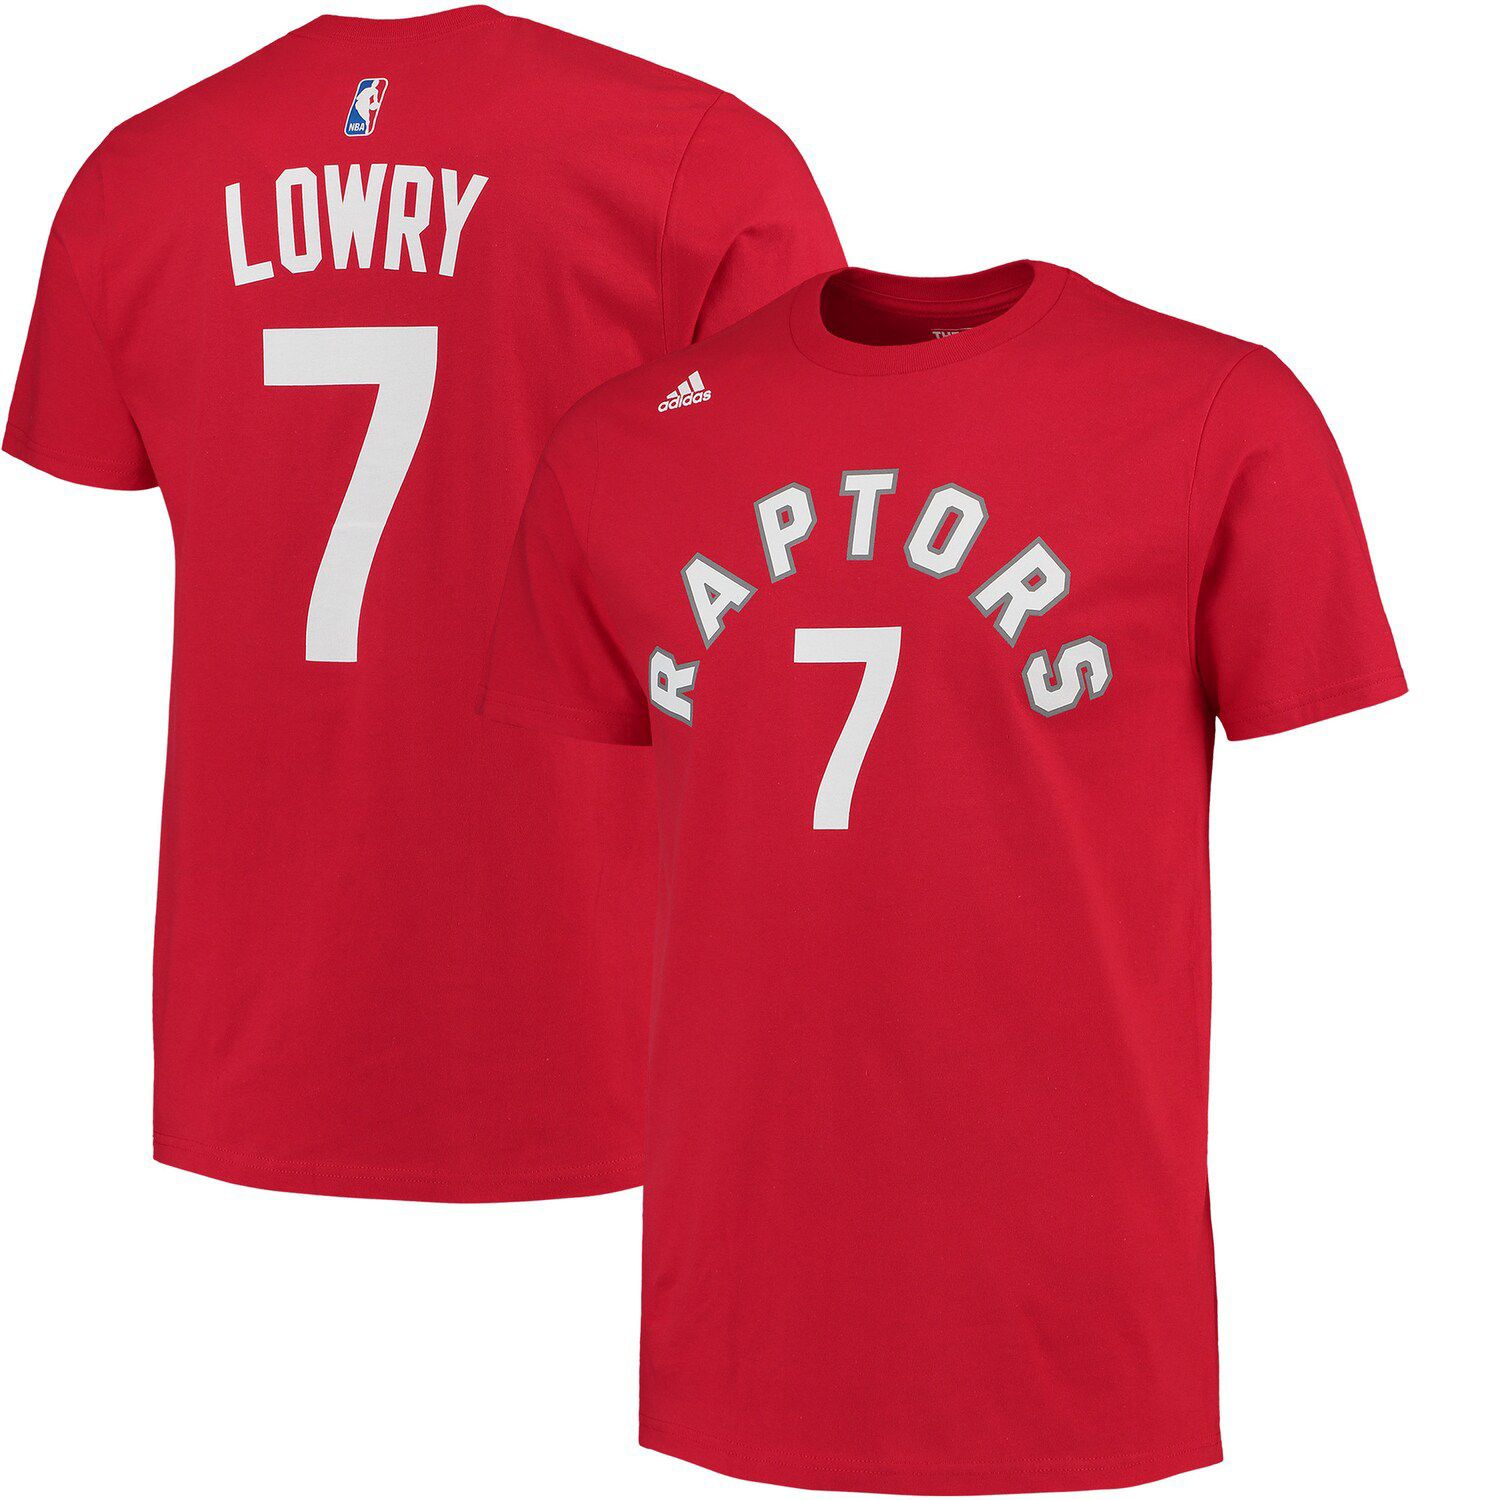 kyle lowry jersey number